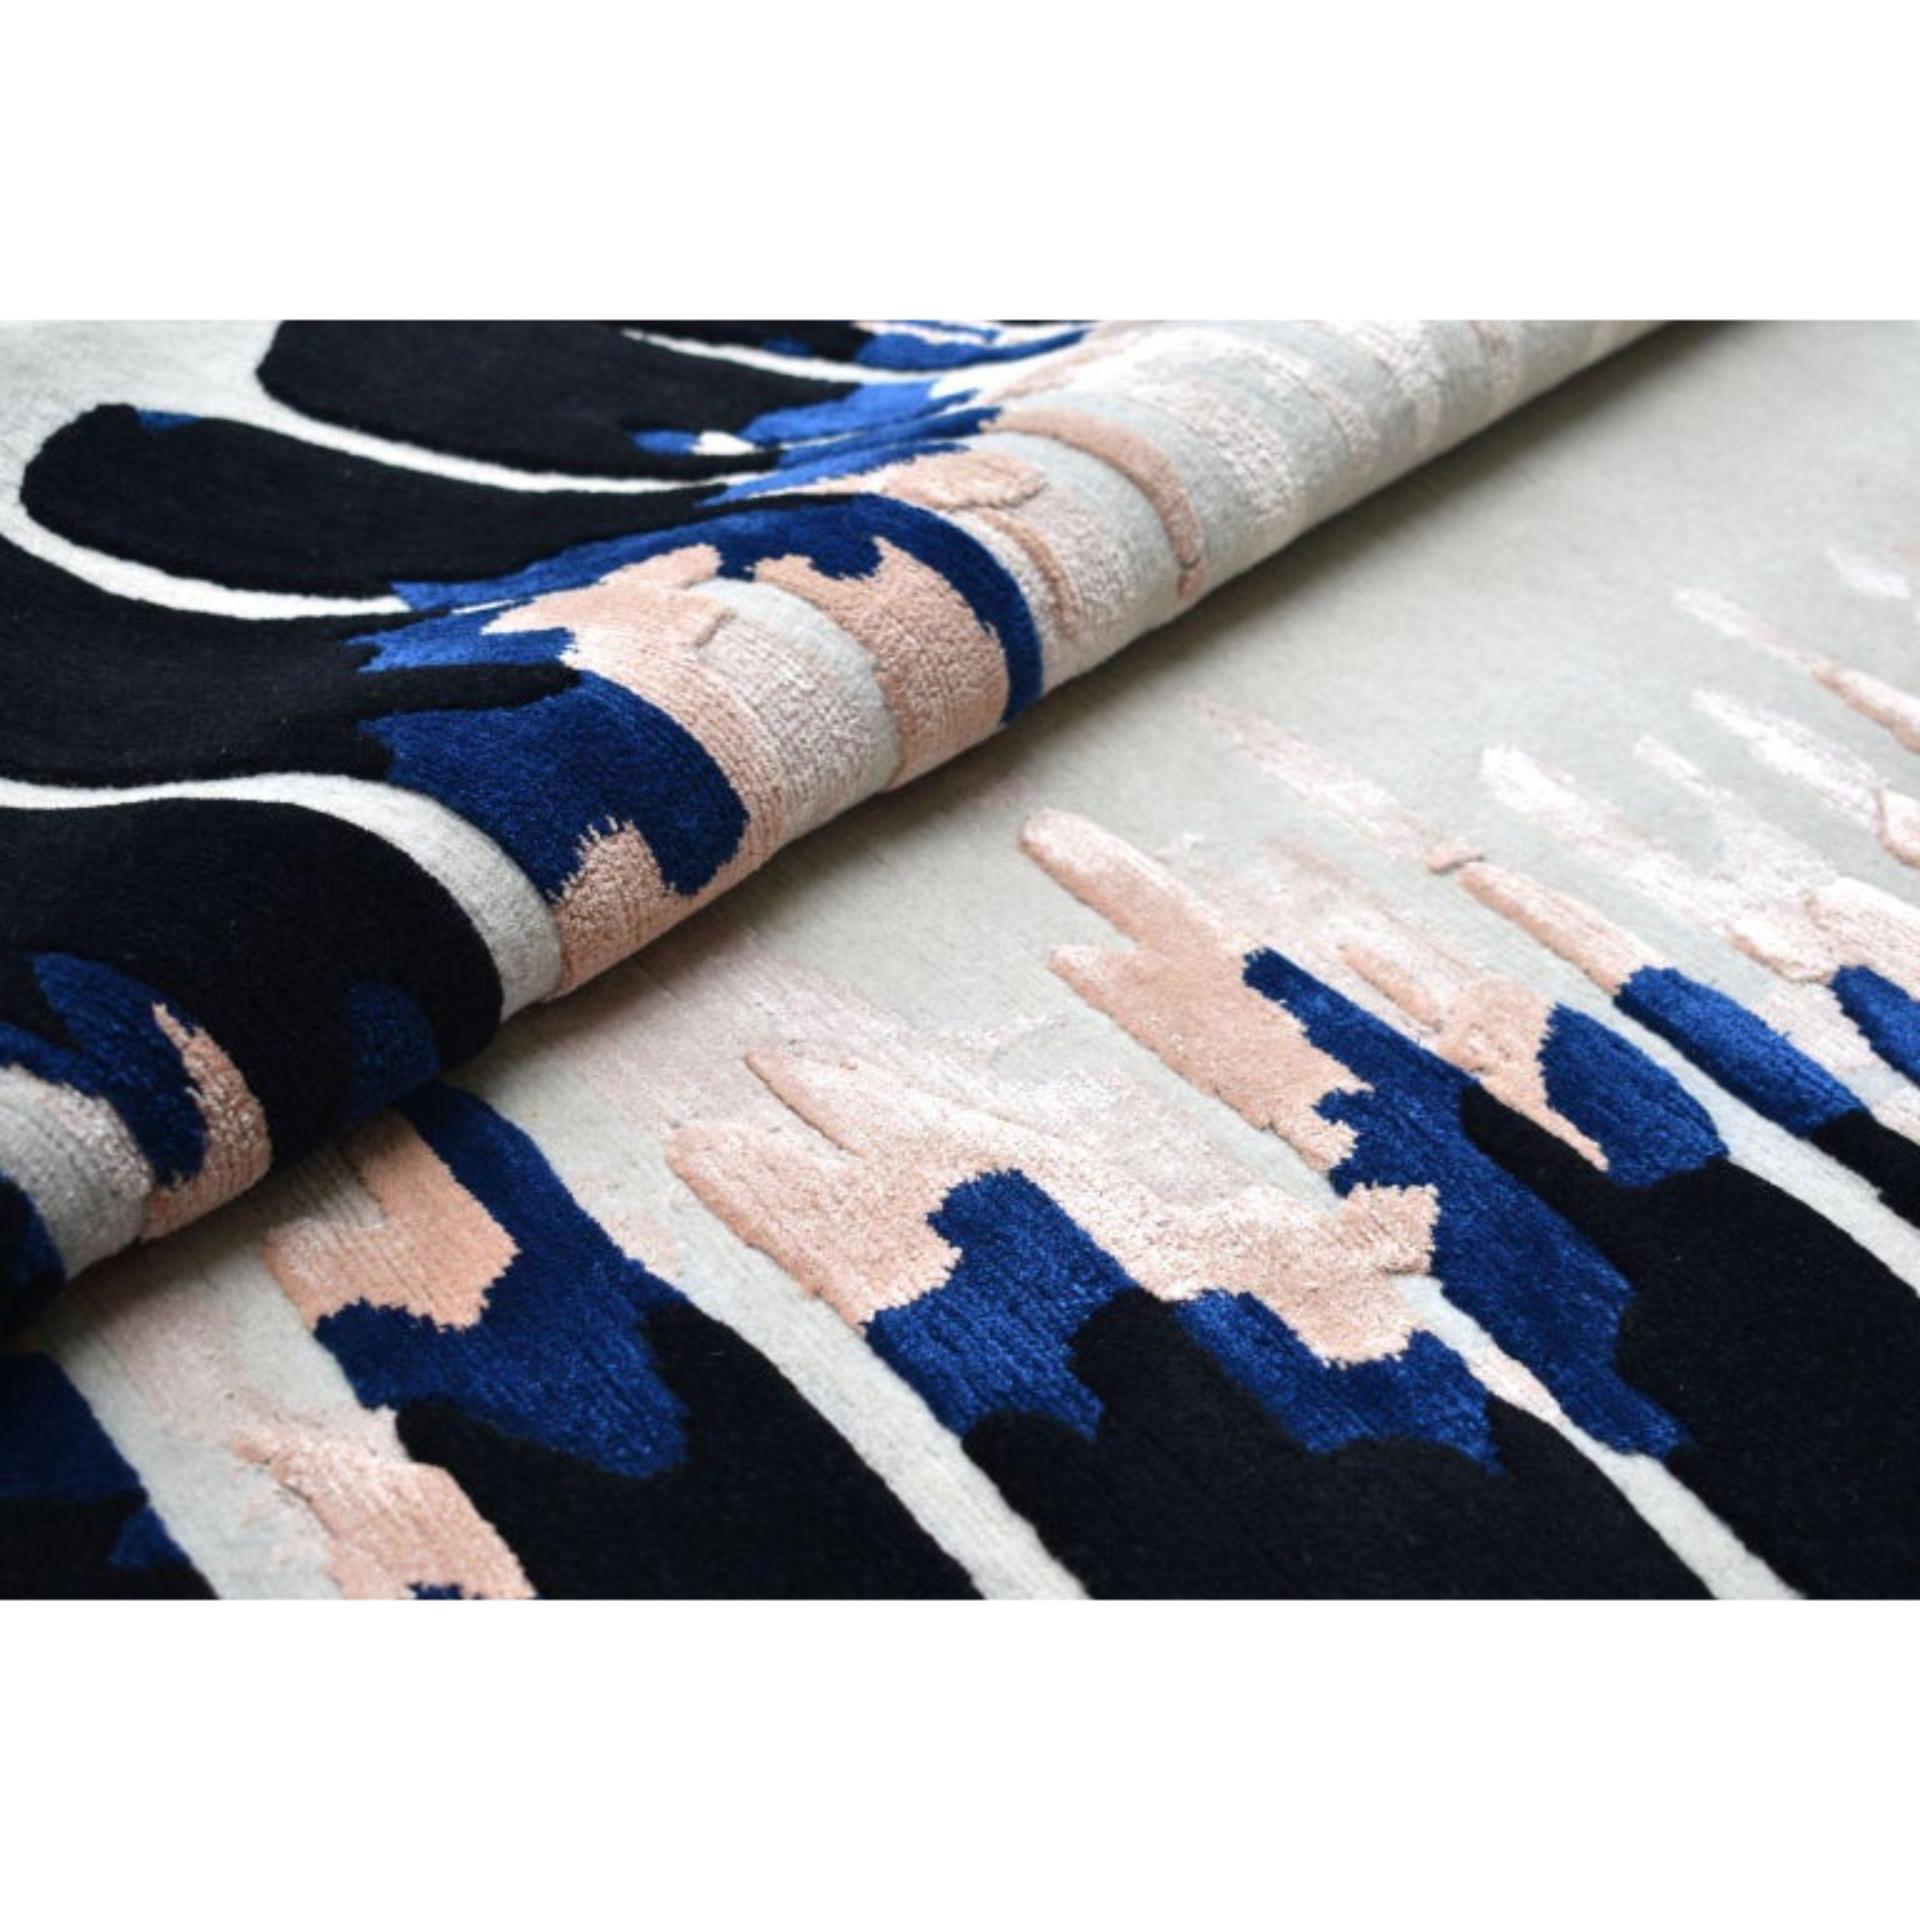 Quill medium rug by Art & Loom
Dimensions: D 274.3 x H 365.8 cm
Materials: New Zealand wool & Chinese silk
Quality (knots per inch): 100
Also available in different dimensions.

Samantha Gallacher has always had a keen eye for aesthetics,